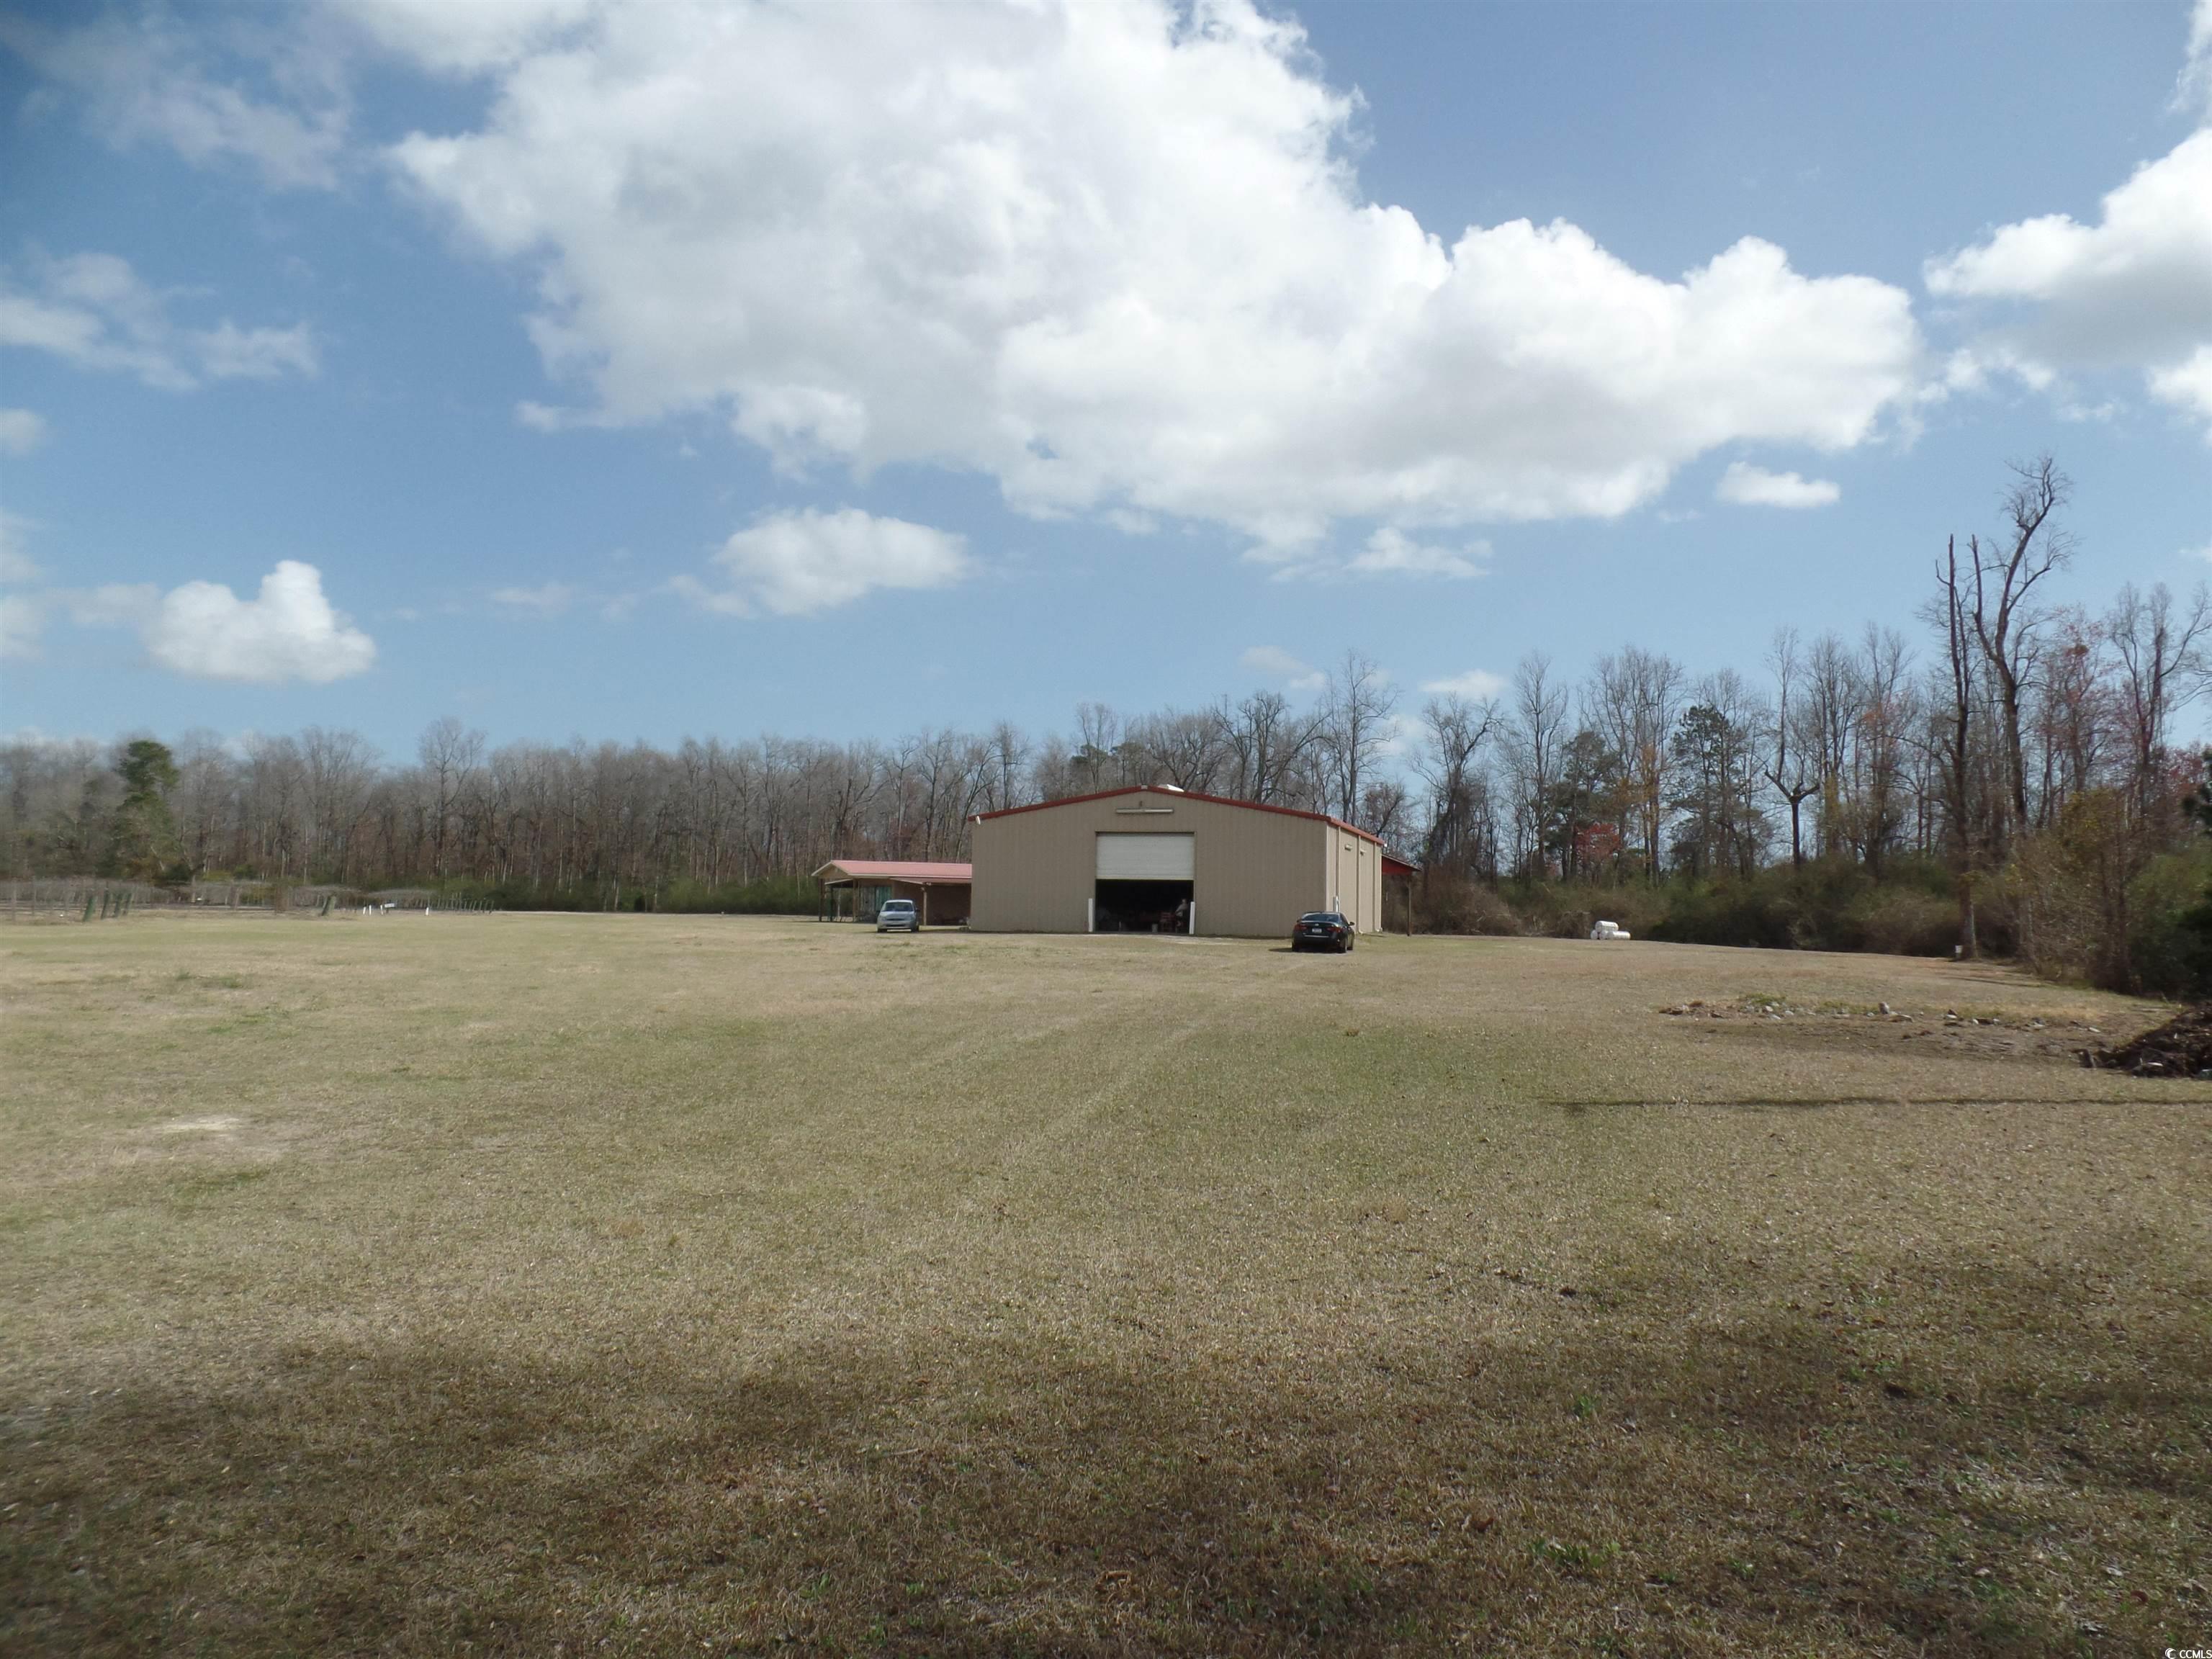 A little piece of paradise!  51.33 acres of natural beauty. This property boasts 6 acres of an annual crop of Magnolia, Noble, Triumph and Carolos Muscadine grapes. Crops are sold  to wineries. No wine is made on the grounds. Property consists of a 75'2"x50'5"metal building with power with  2 overhead doors. , Cargo Containers with dimensions of  41'x18',ponds and gorgeous peaceful landscape !!! , .  Options for this property are limitless!. This piece of paradise is under the Horry County farm conservation program .Build your forever home on this beautiful Vinyard!!